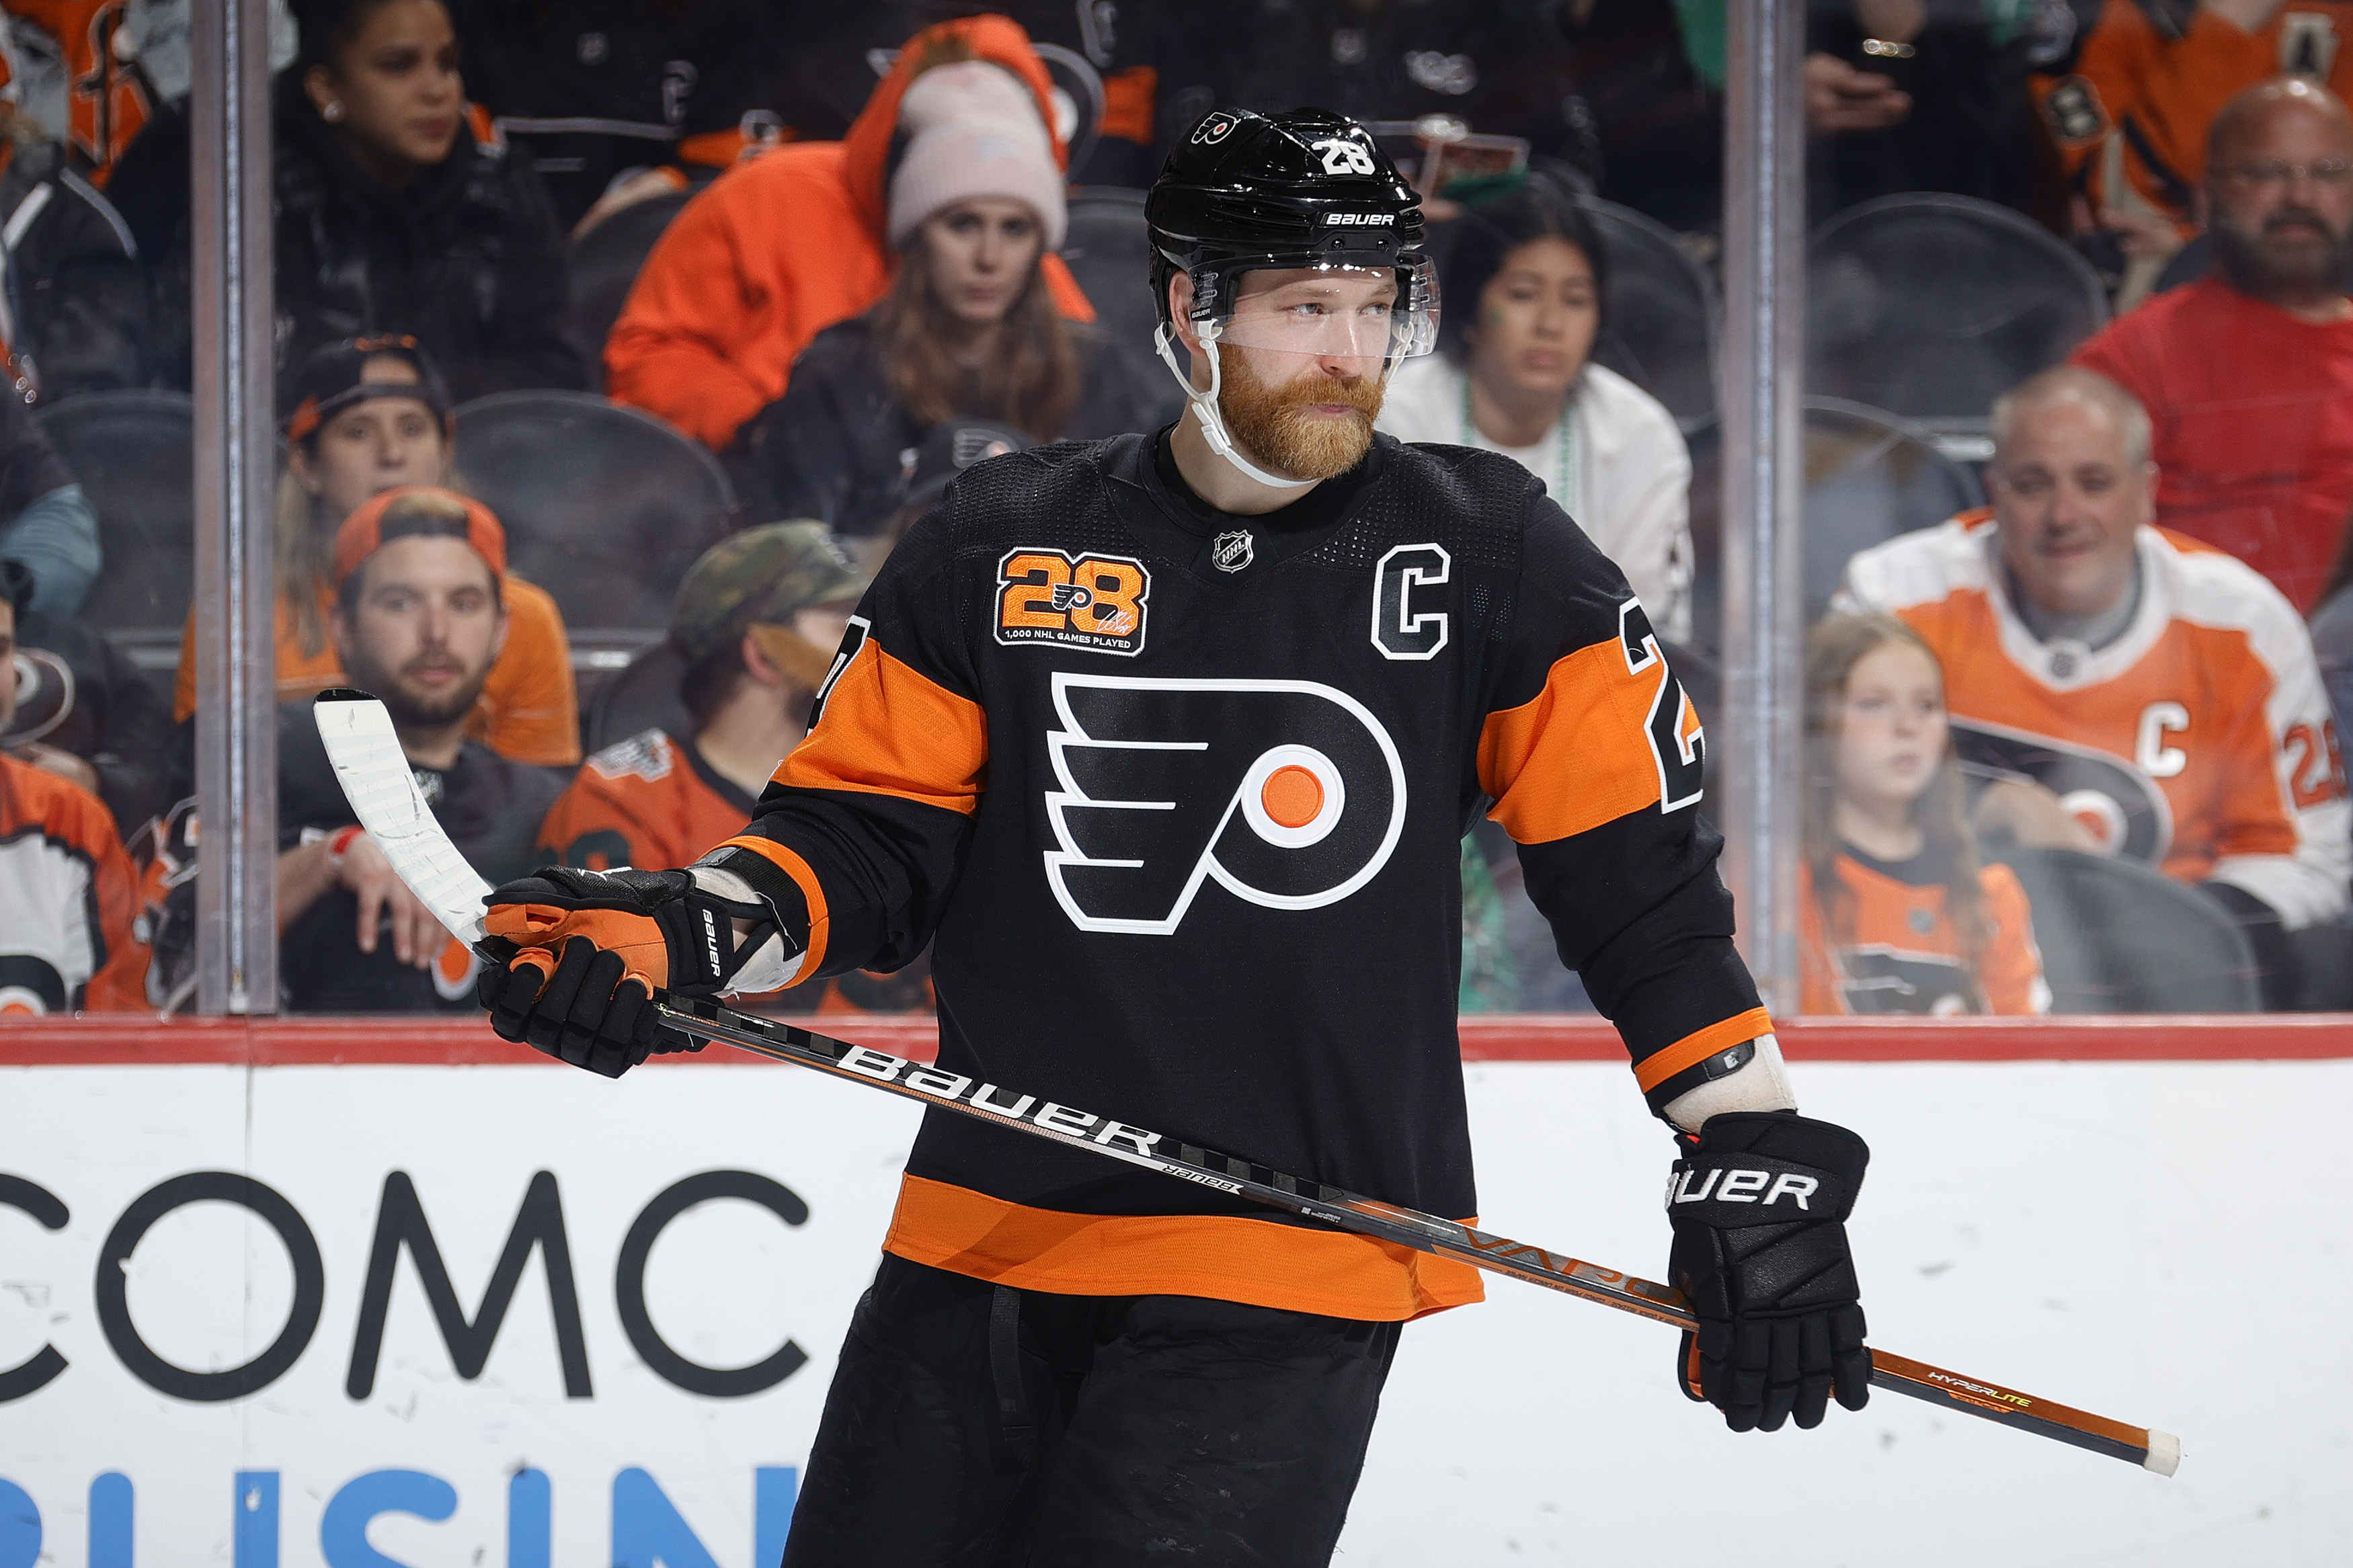 Return in Giroux Trade the Result of Shortcomings by Flyers Management